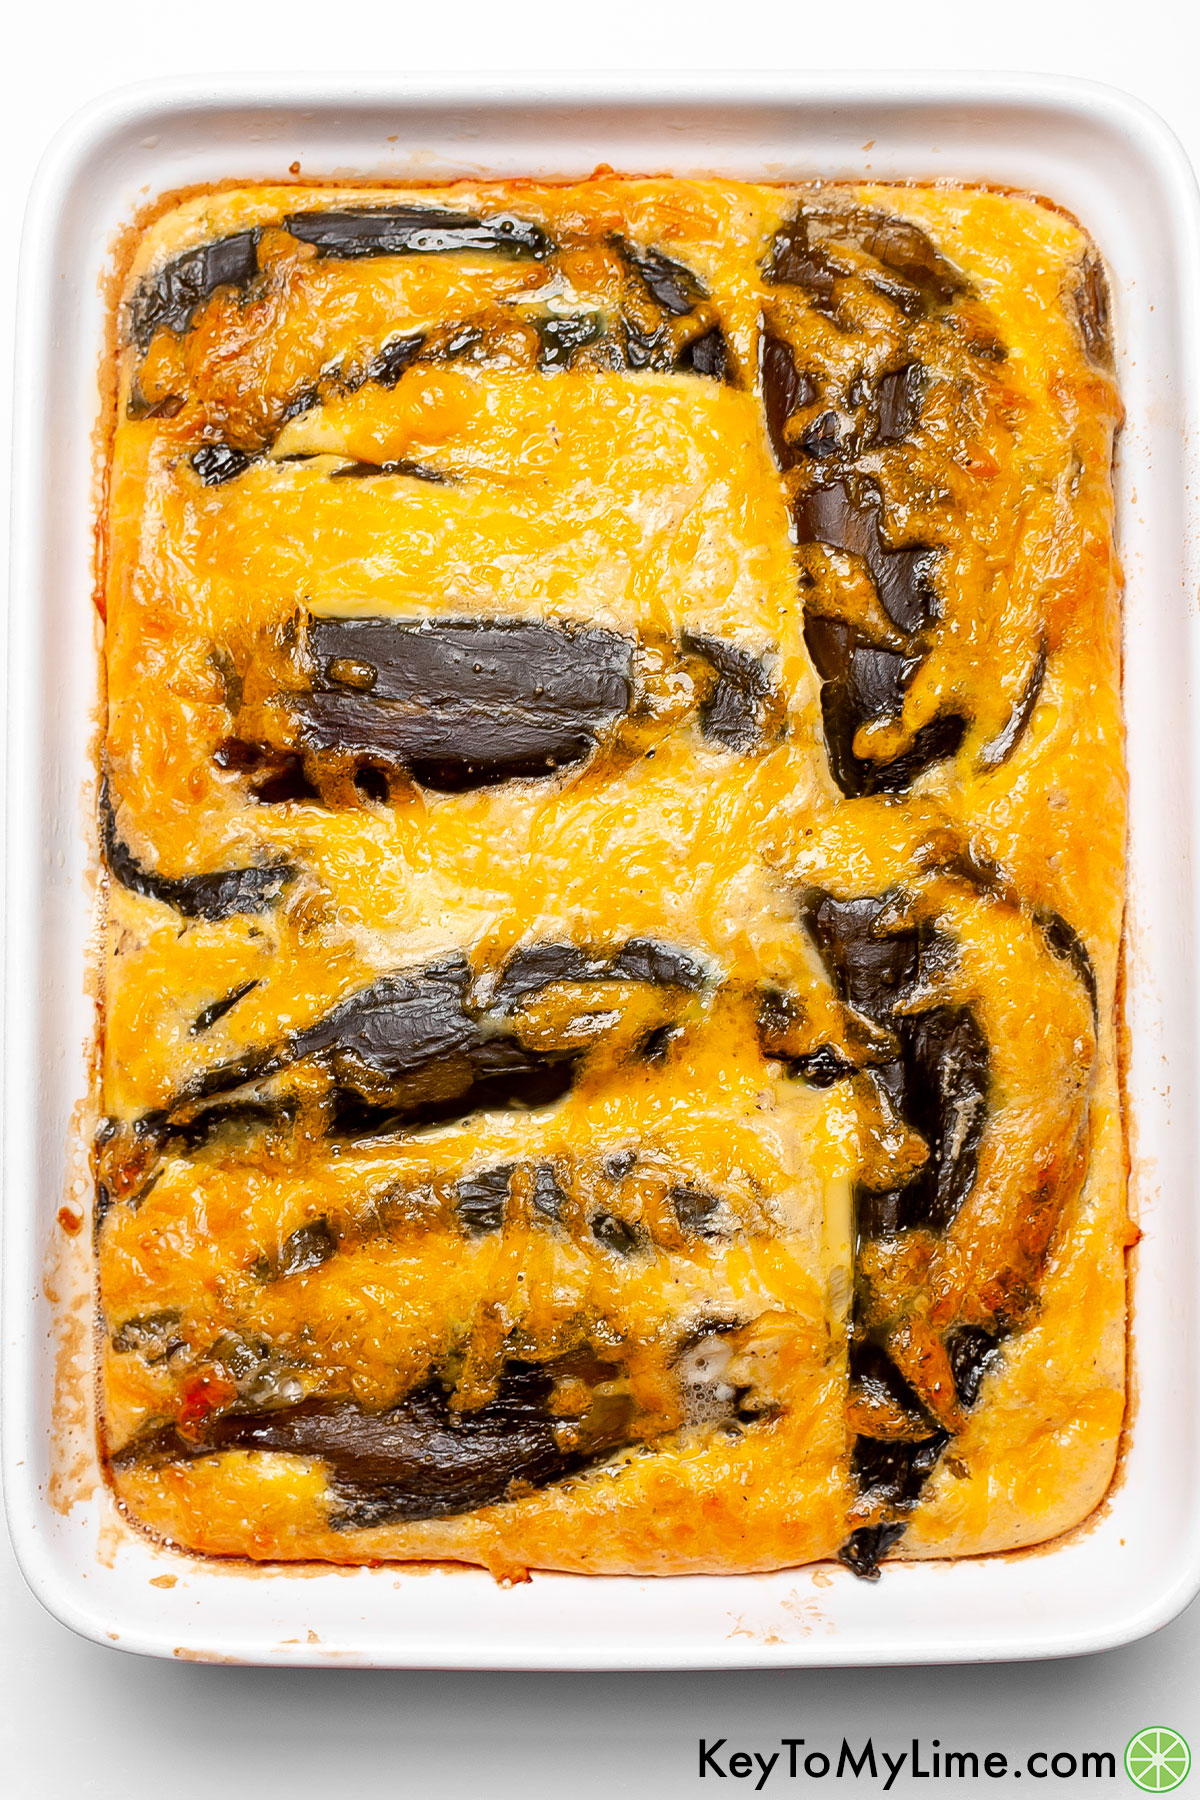 A picture of chile relleno casserole showing how the casserole is puffy and fluffy right when it comes out of the oven.